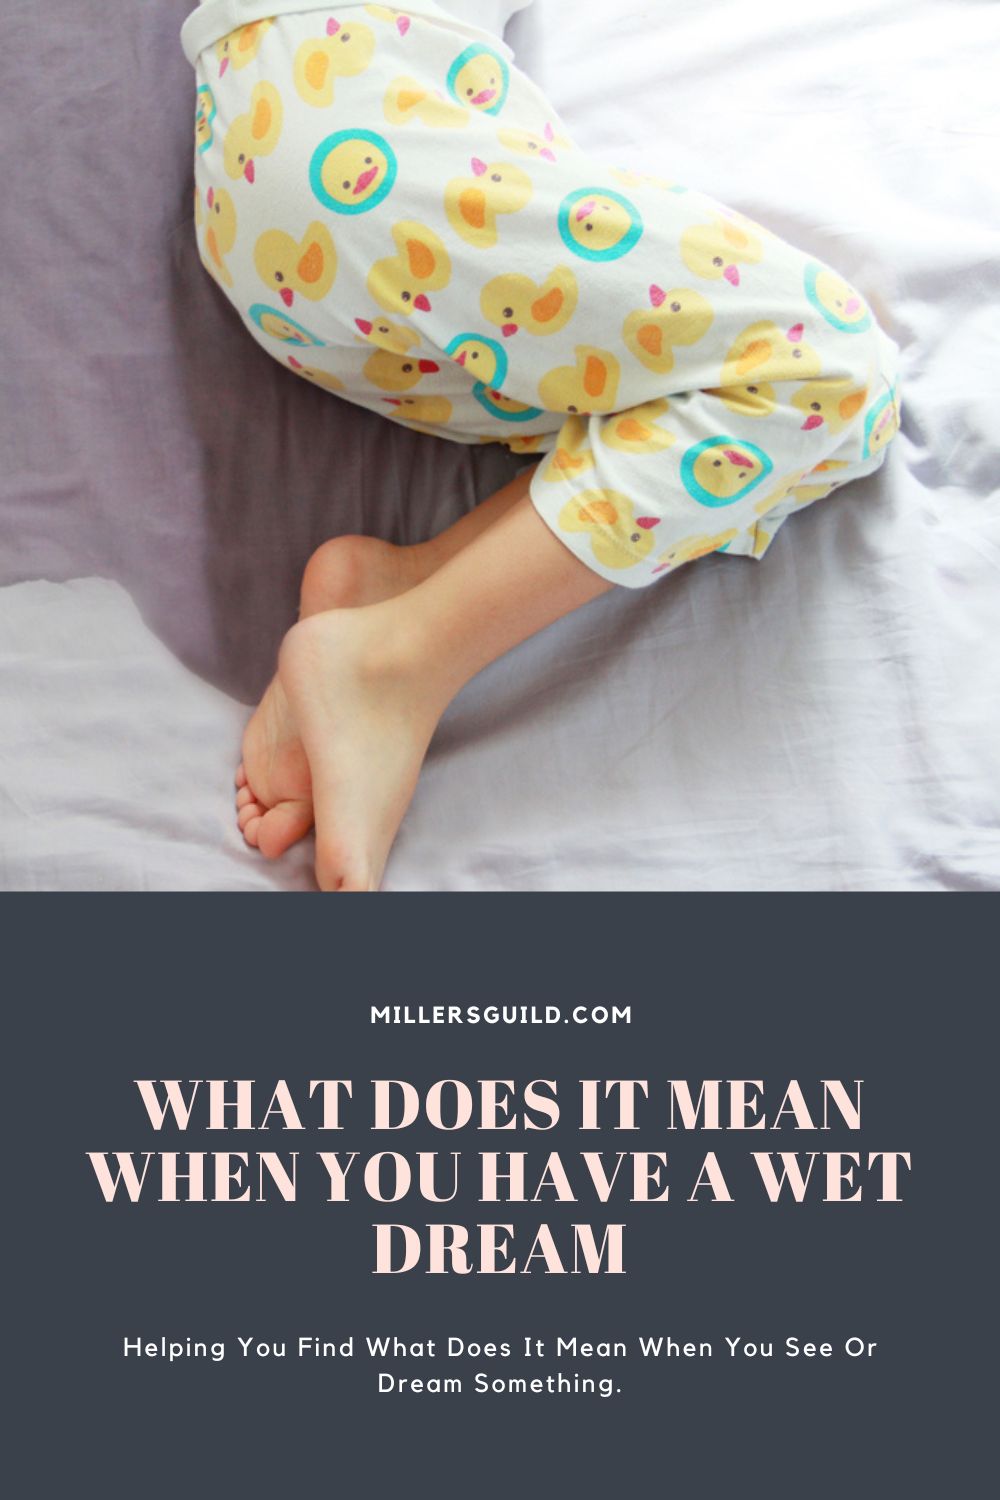 What Does It Mean When You Have A Wet Dream? (Facts & Spiritual)